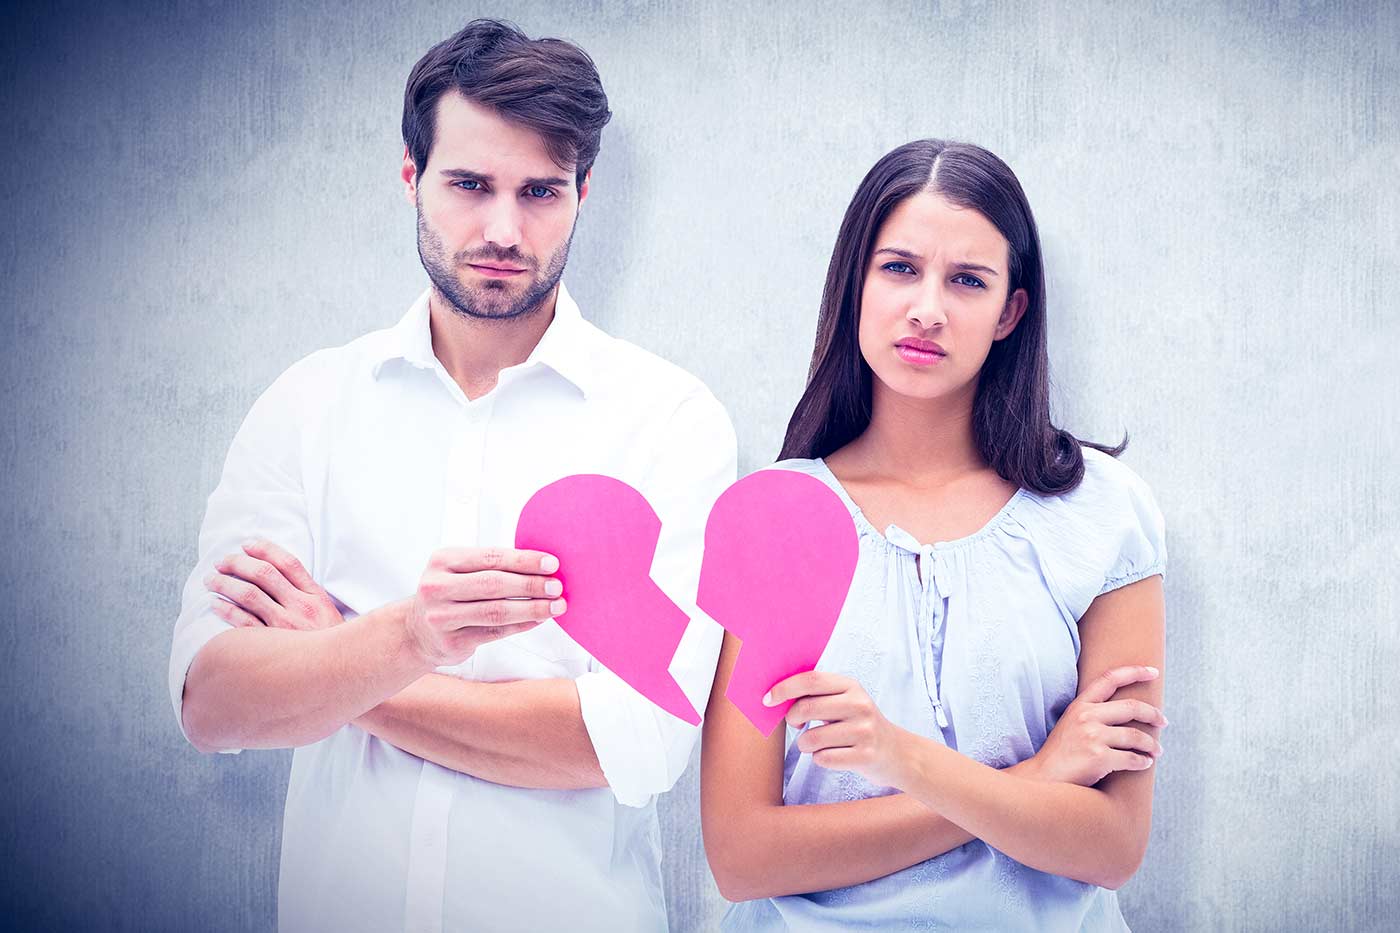 I am going through a divorce or separation should I tell my employer?